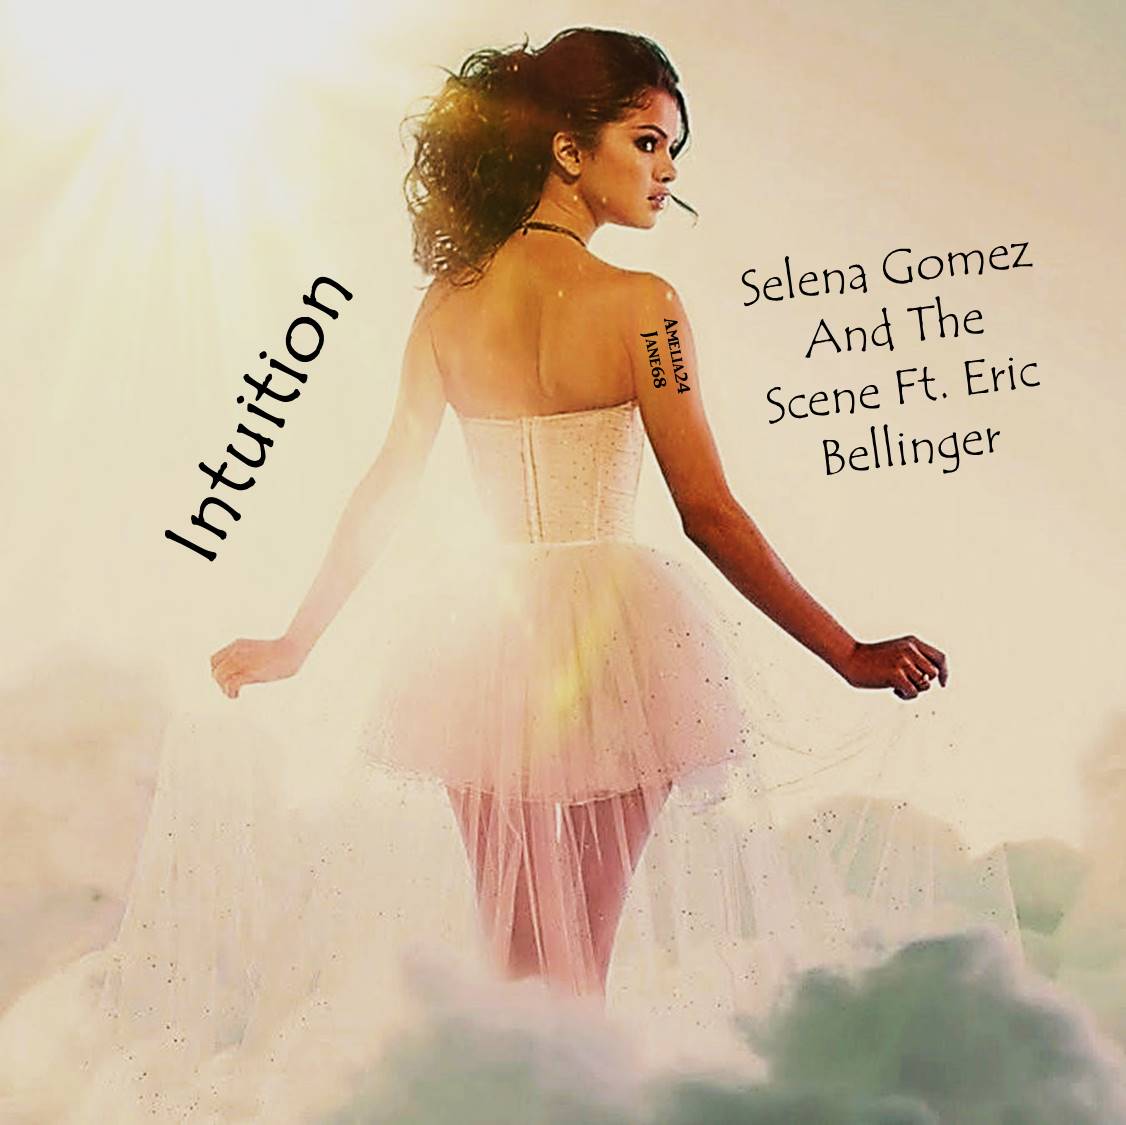 Intuition BY Selena Gomez And The Scene Ft. Eric Bellinger